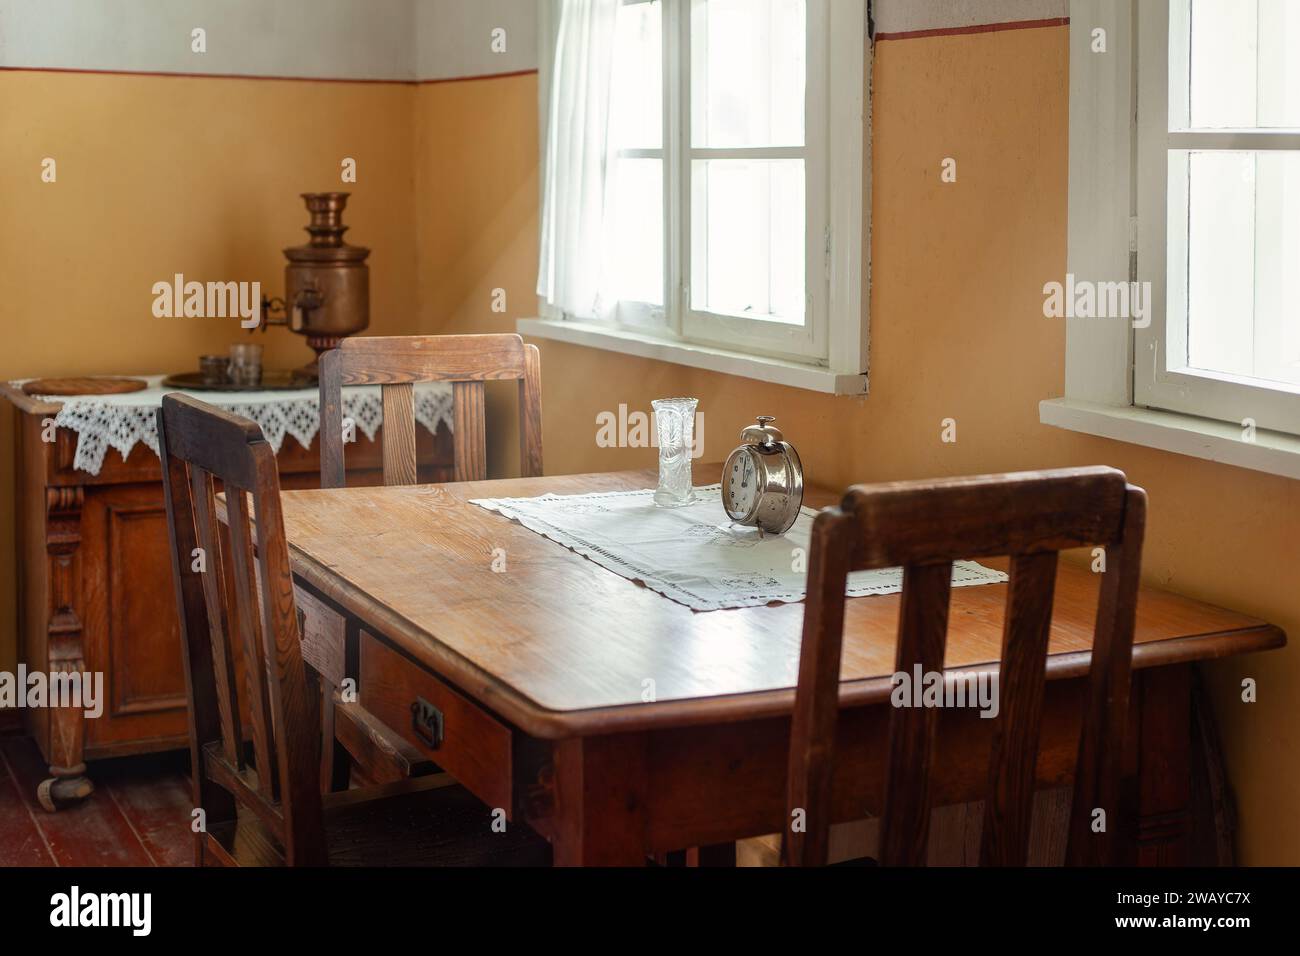 An antique wooden table and three chairs by the window, daylight streaming in to illuminate a baptismal vase and a large antique clock on the table. Stock Photo